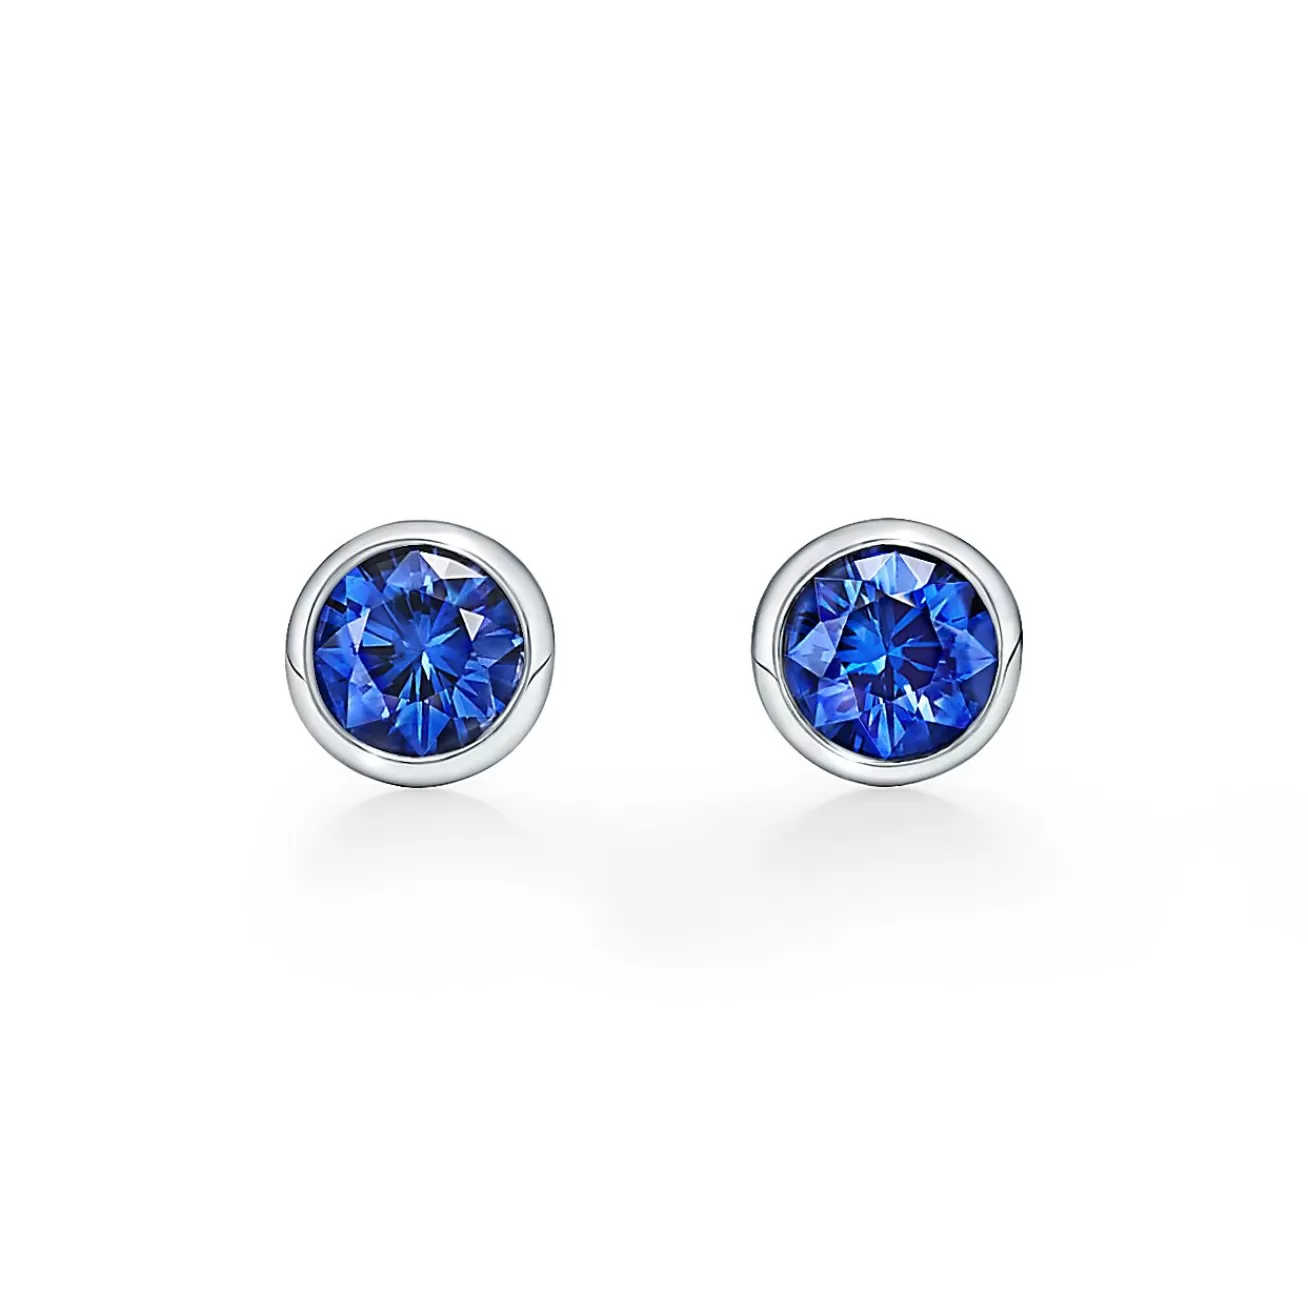 Tiffany & Co. Elsa Peretti® Color by the Yard earrings in platinum with sapphires. | ^ Earrings | Platinum Jewelry